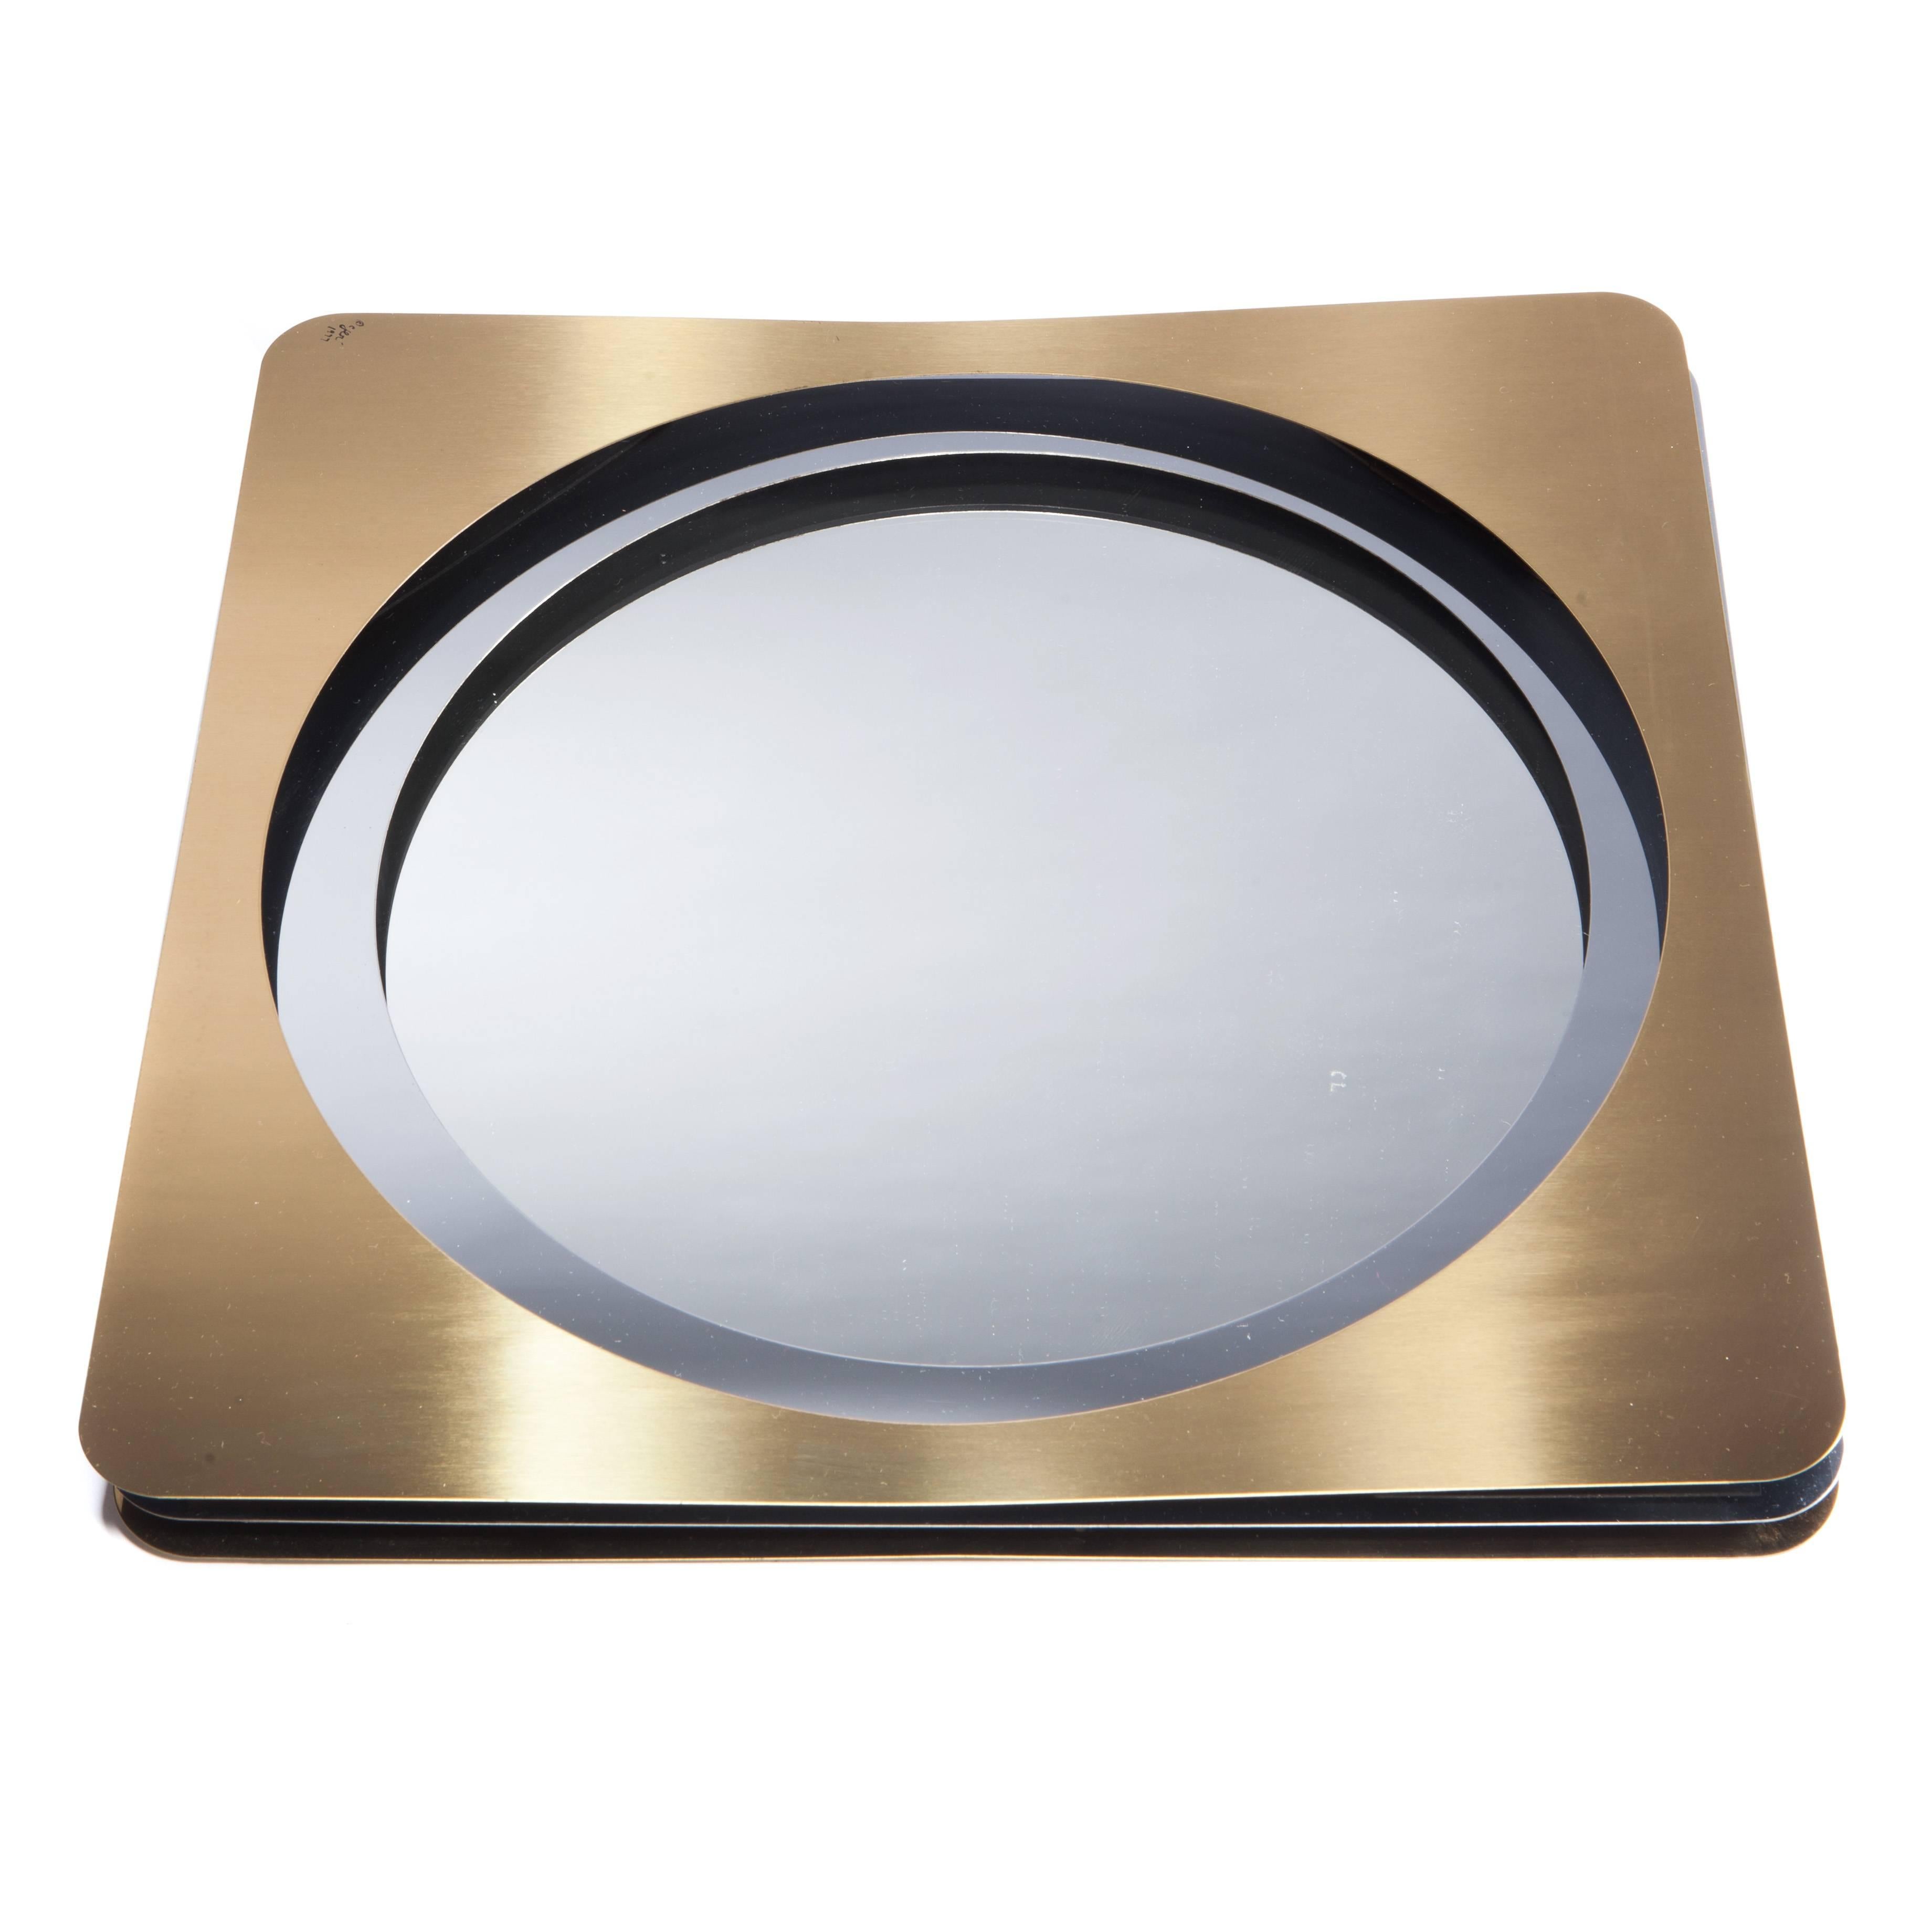 Layered panels in brass and chrome, with concentric circular cut-outs, lend depth to this three-dimensional mirror. Signed 